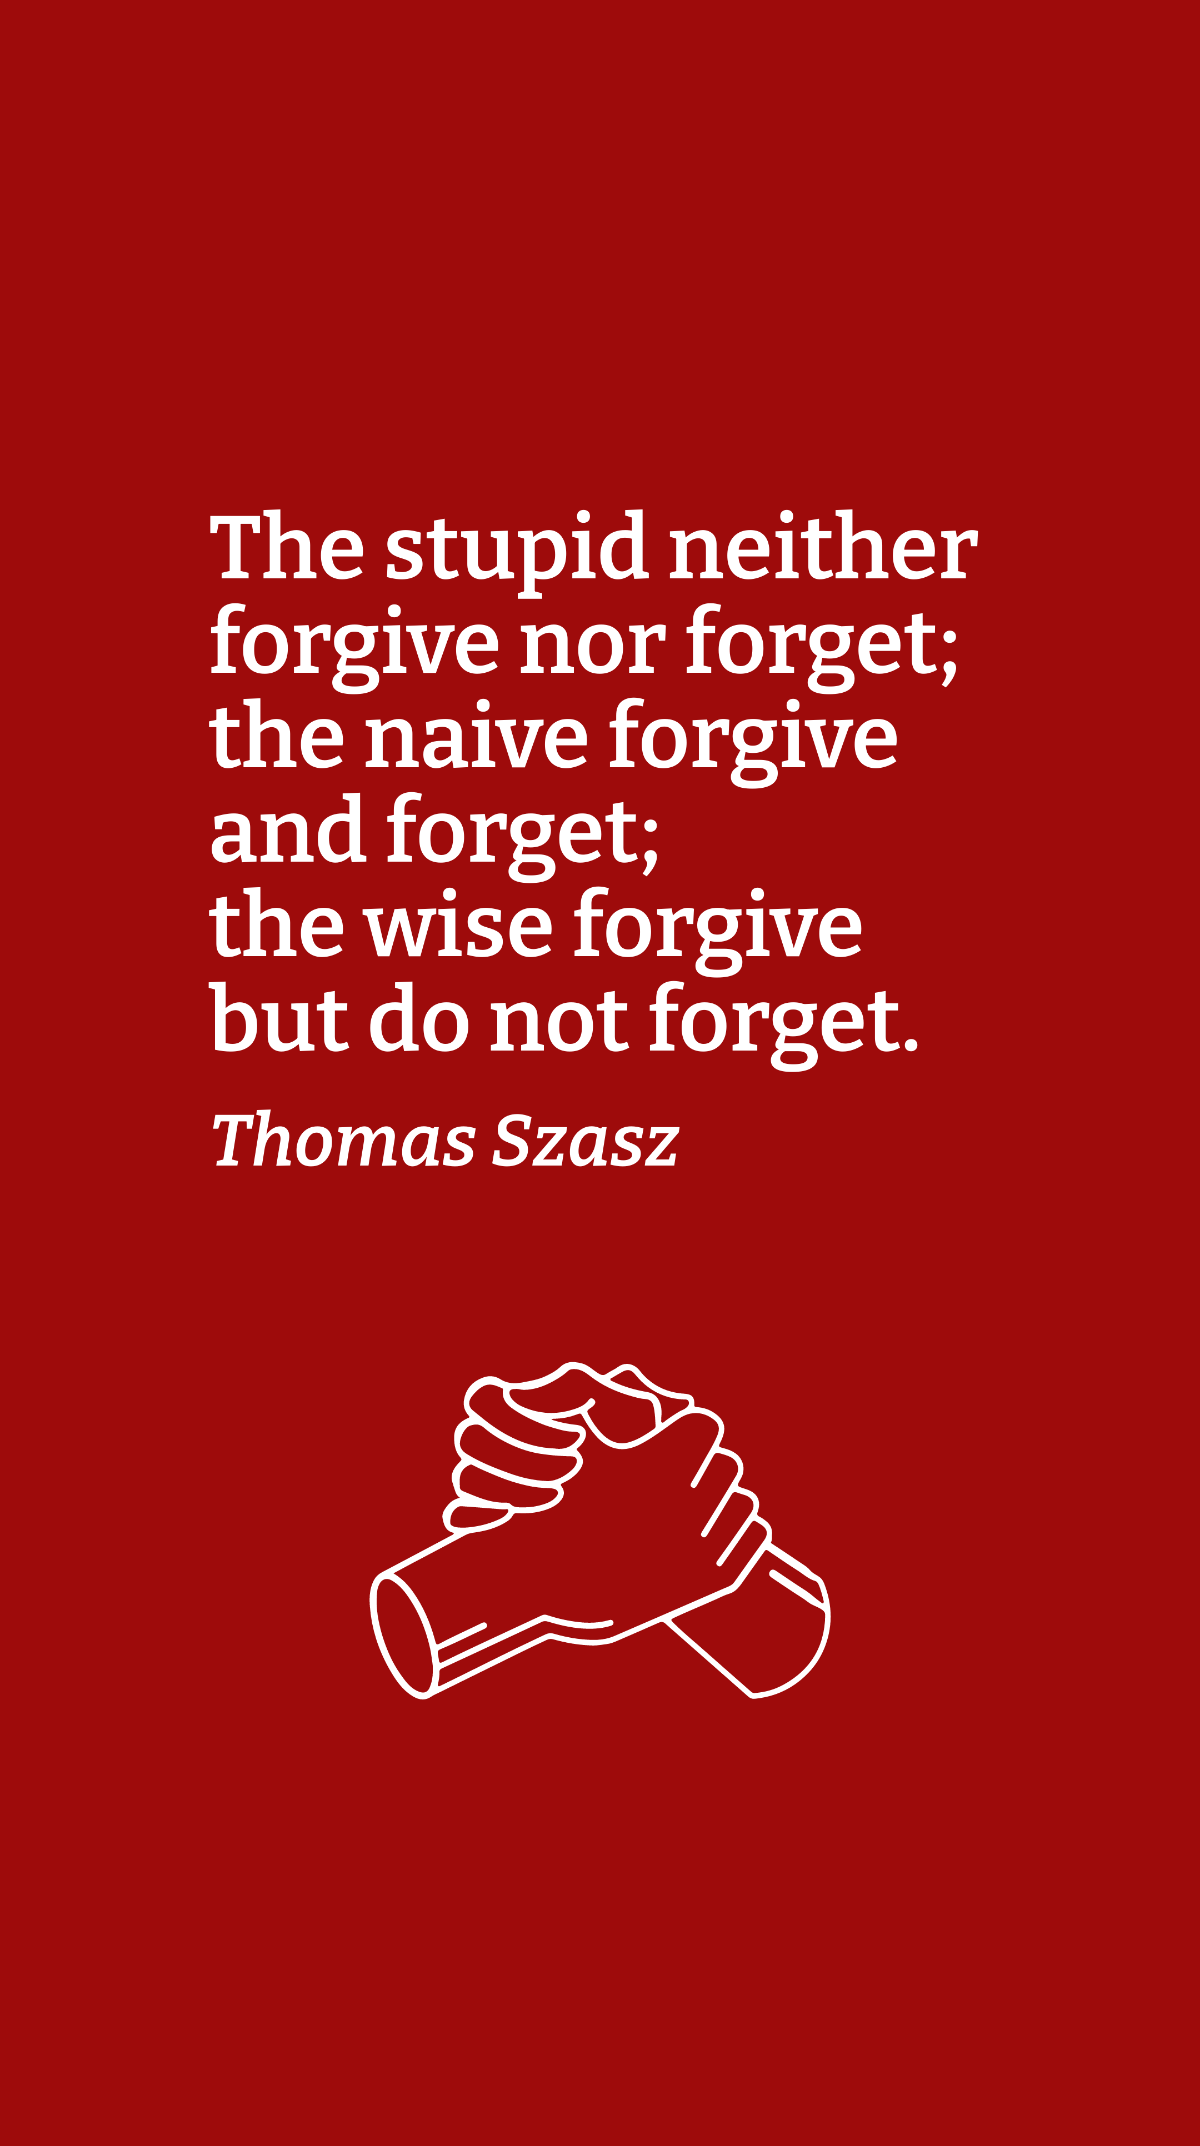 Free Thomas Szasz - The stupid neither forgive nor forget; the naive forgive and forget; the wise forgive but do not forget. Template